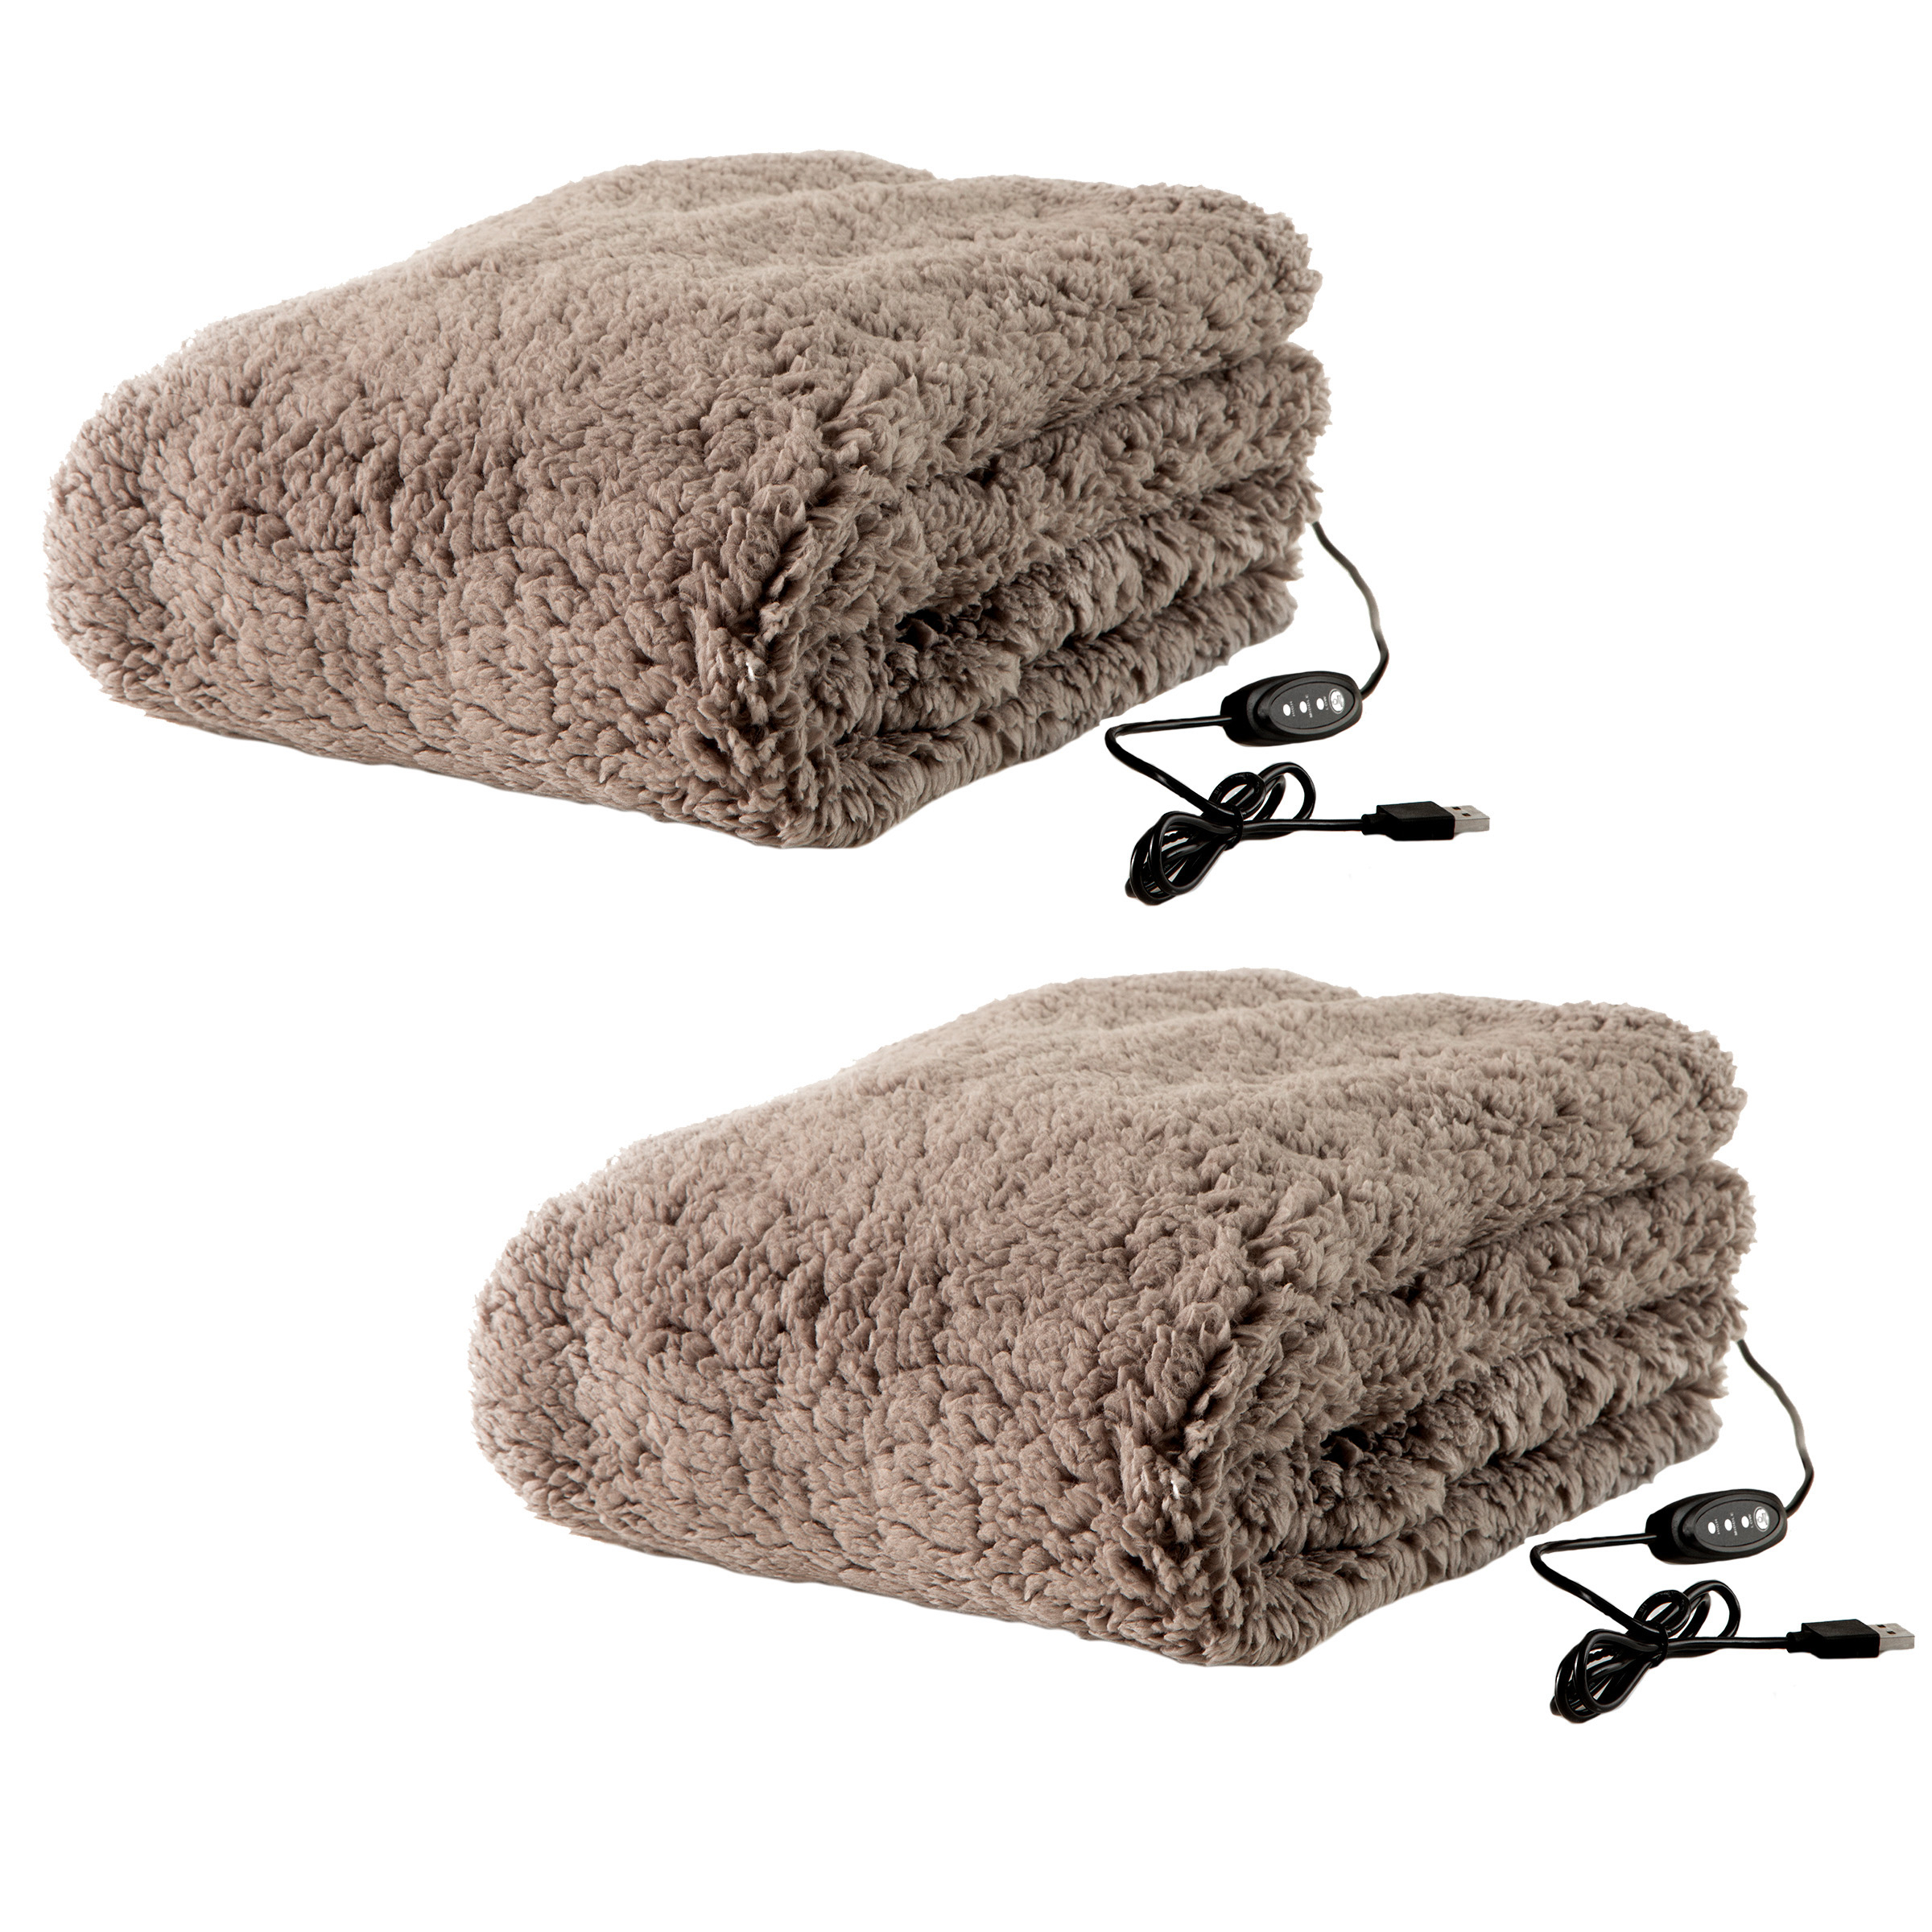 2Pack Heated Blanket USB-Powered Sherpa Throw Blankets Winter Car Accessories - Gray